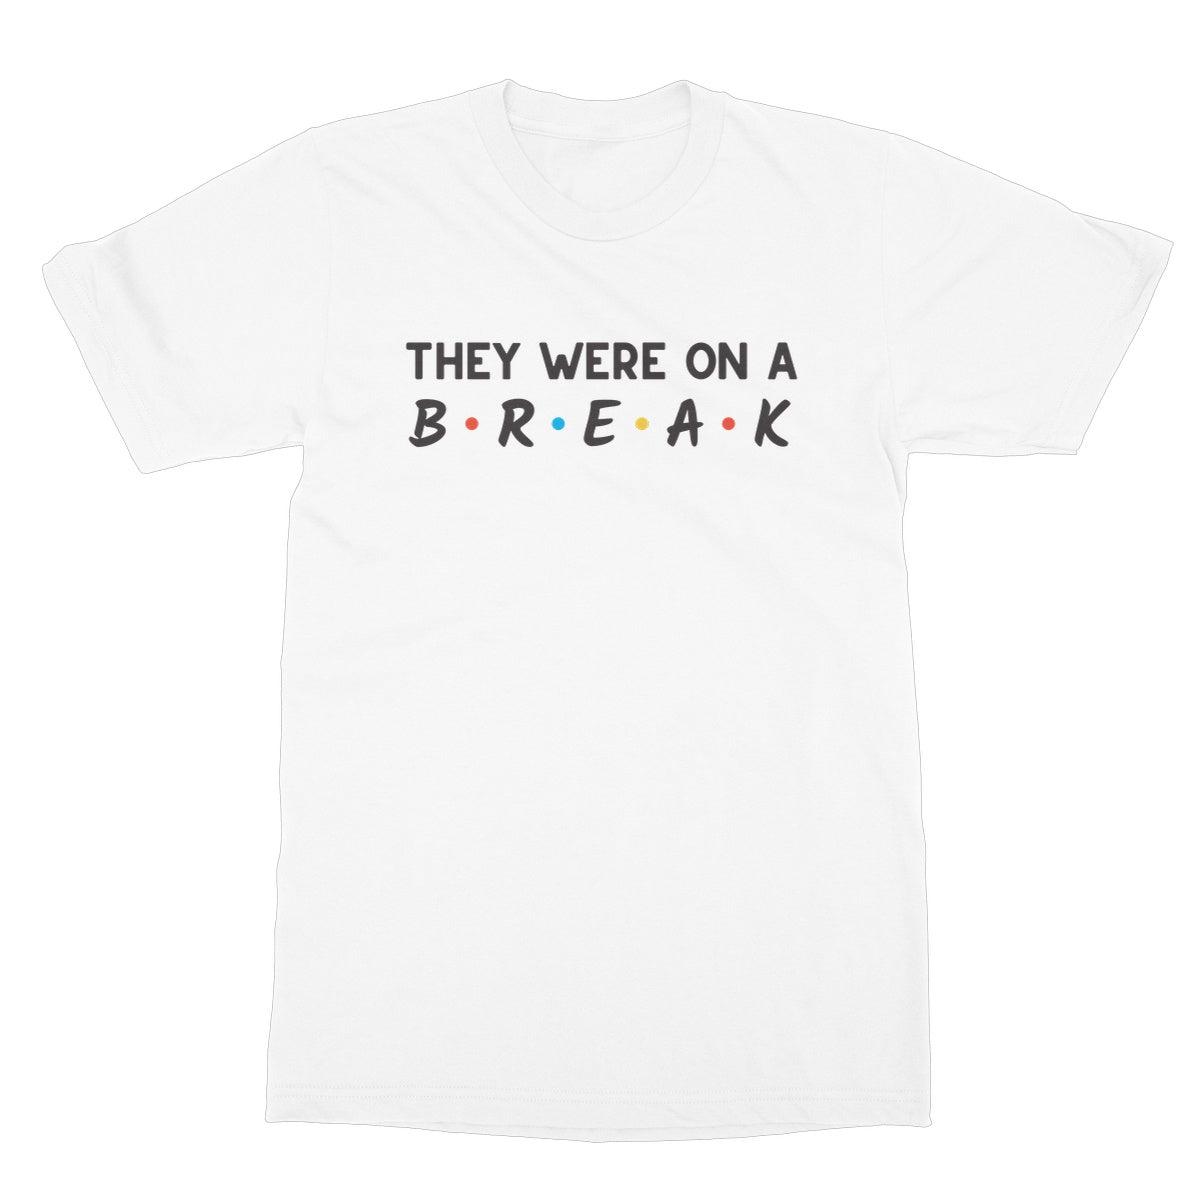 they were on a break t shirt white